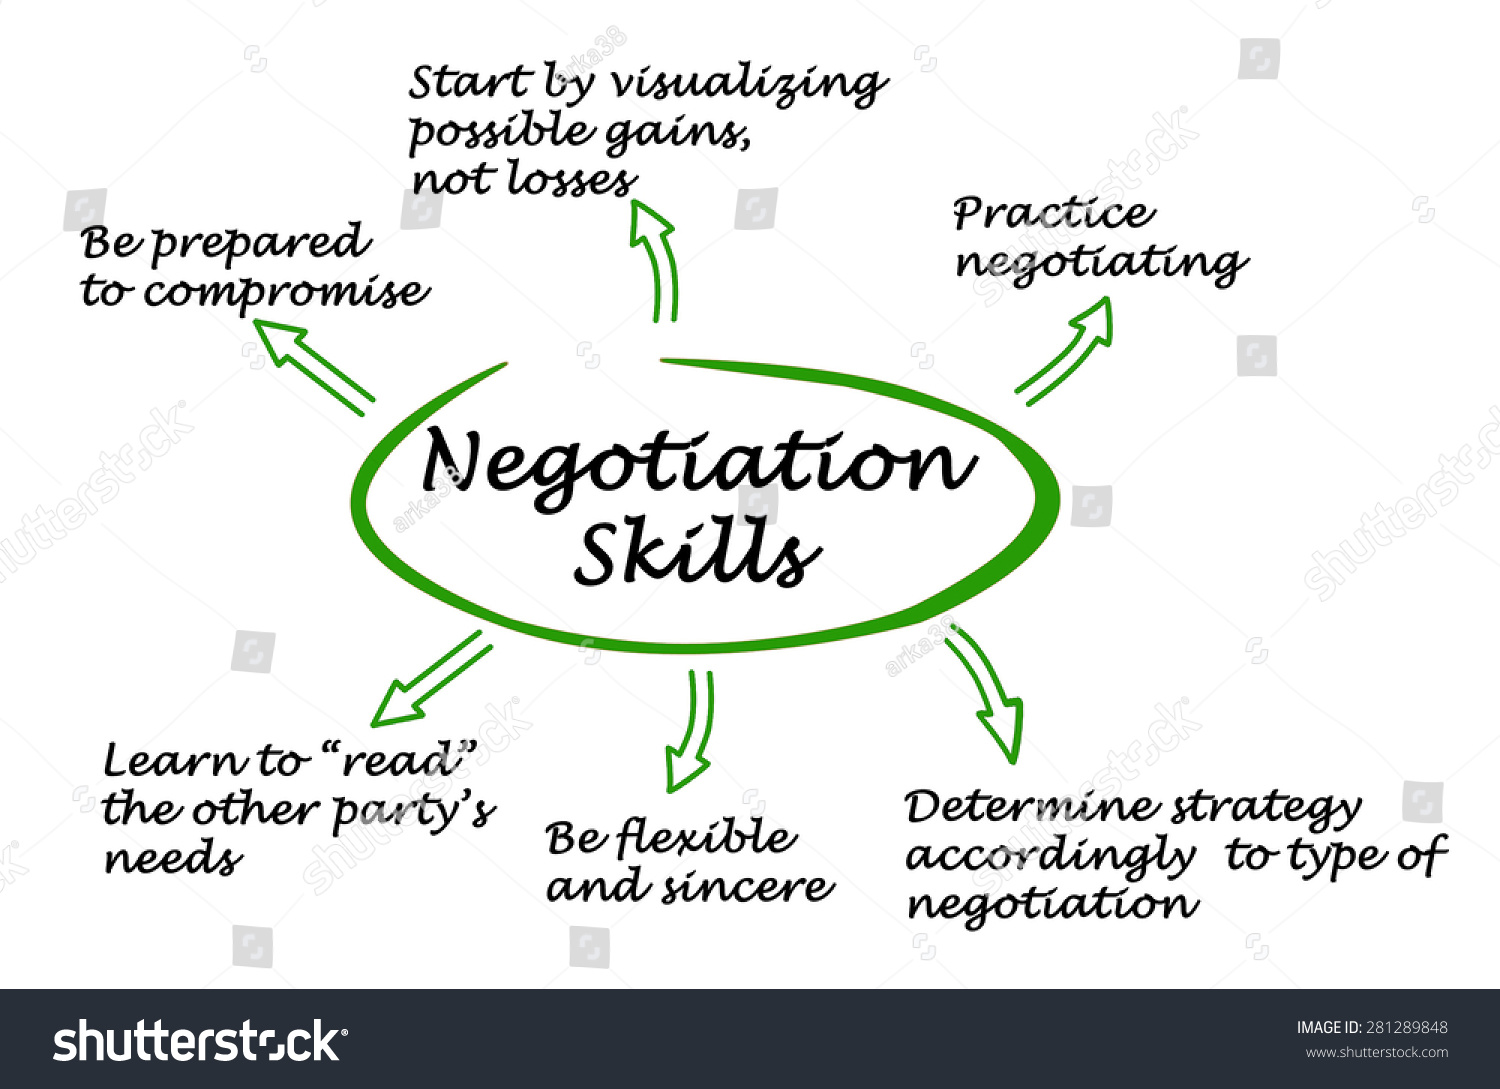 The importance of planning a negotiation